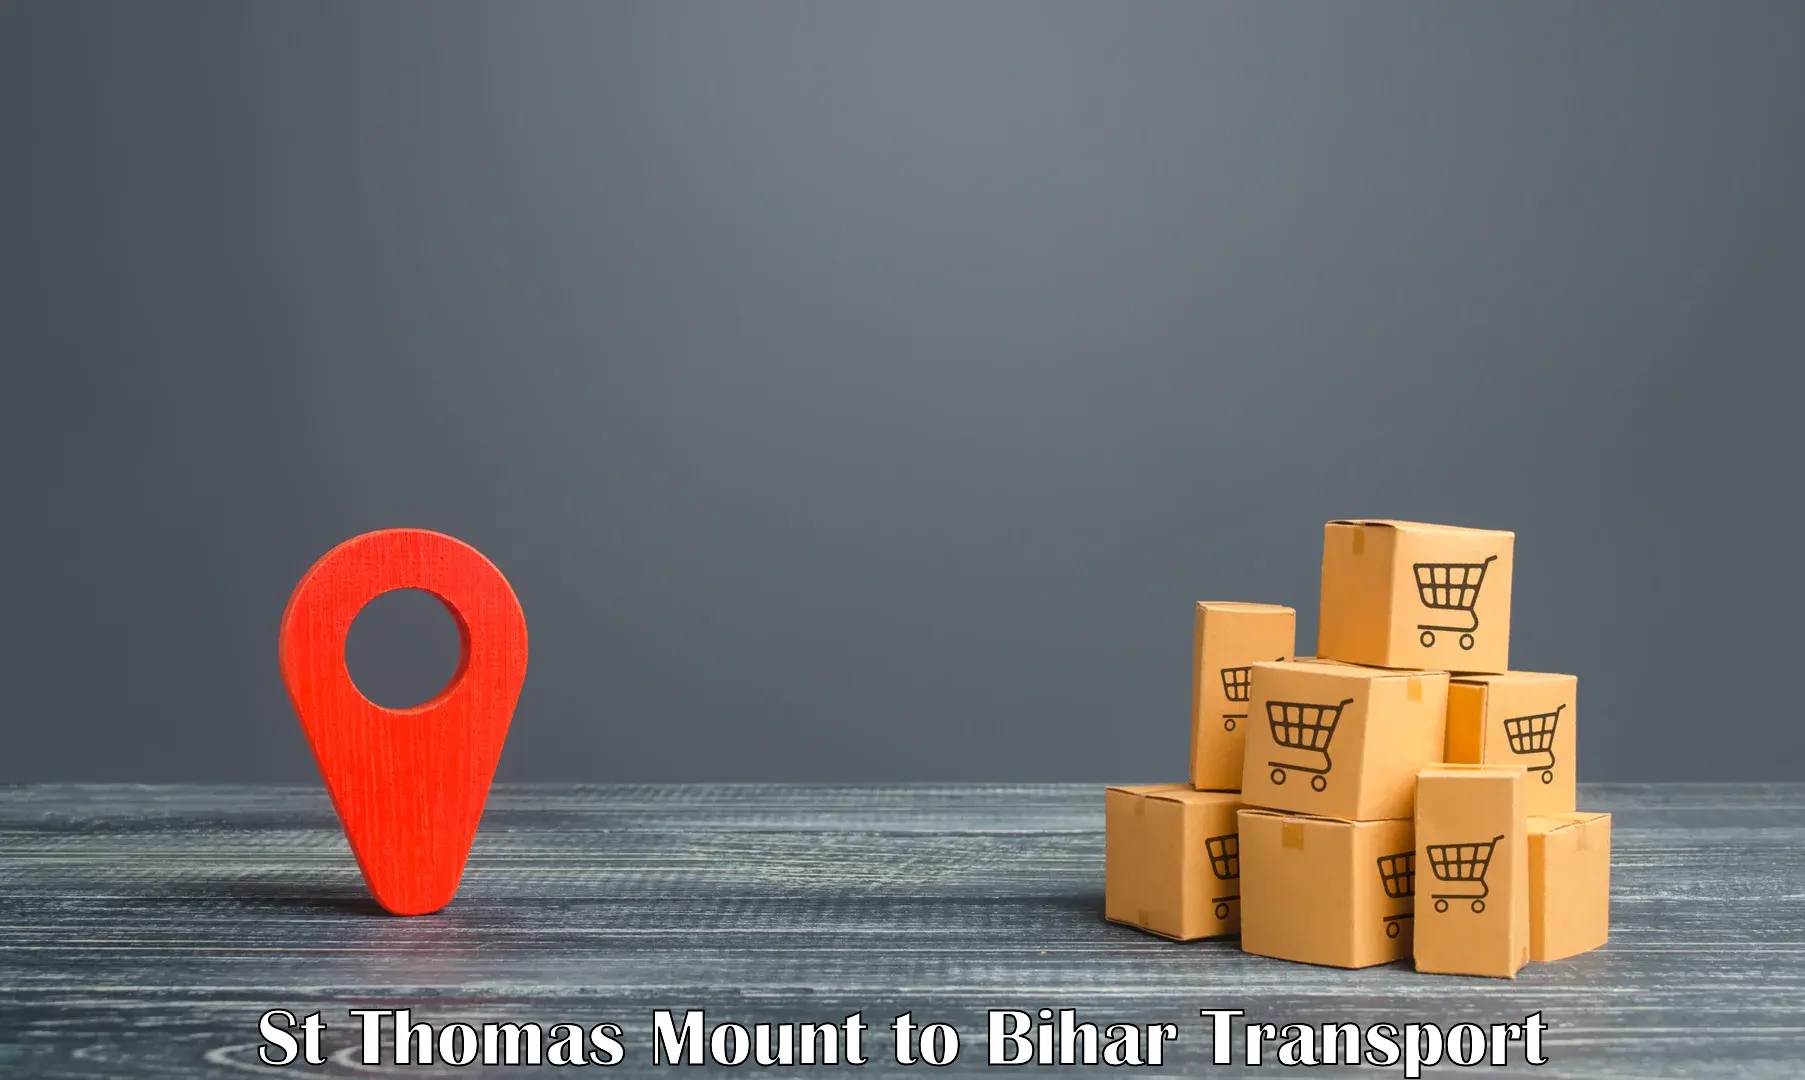 Nearby transport service St Thomas Mount to Sheonar